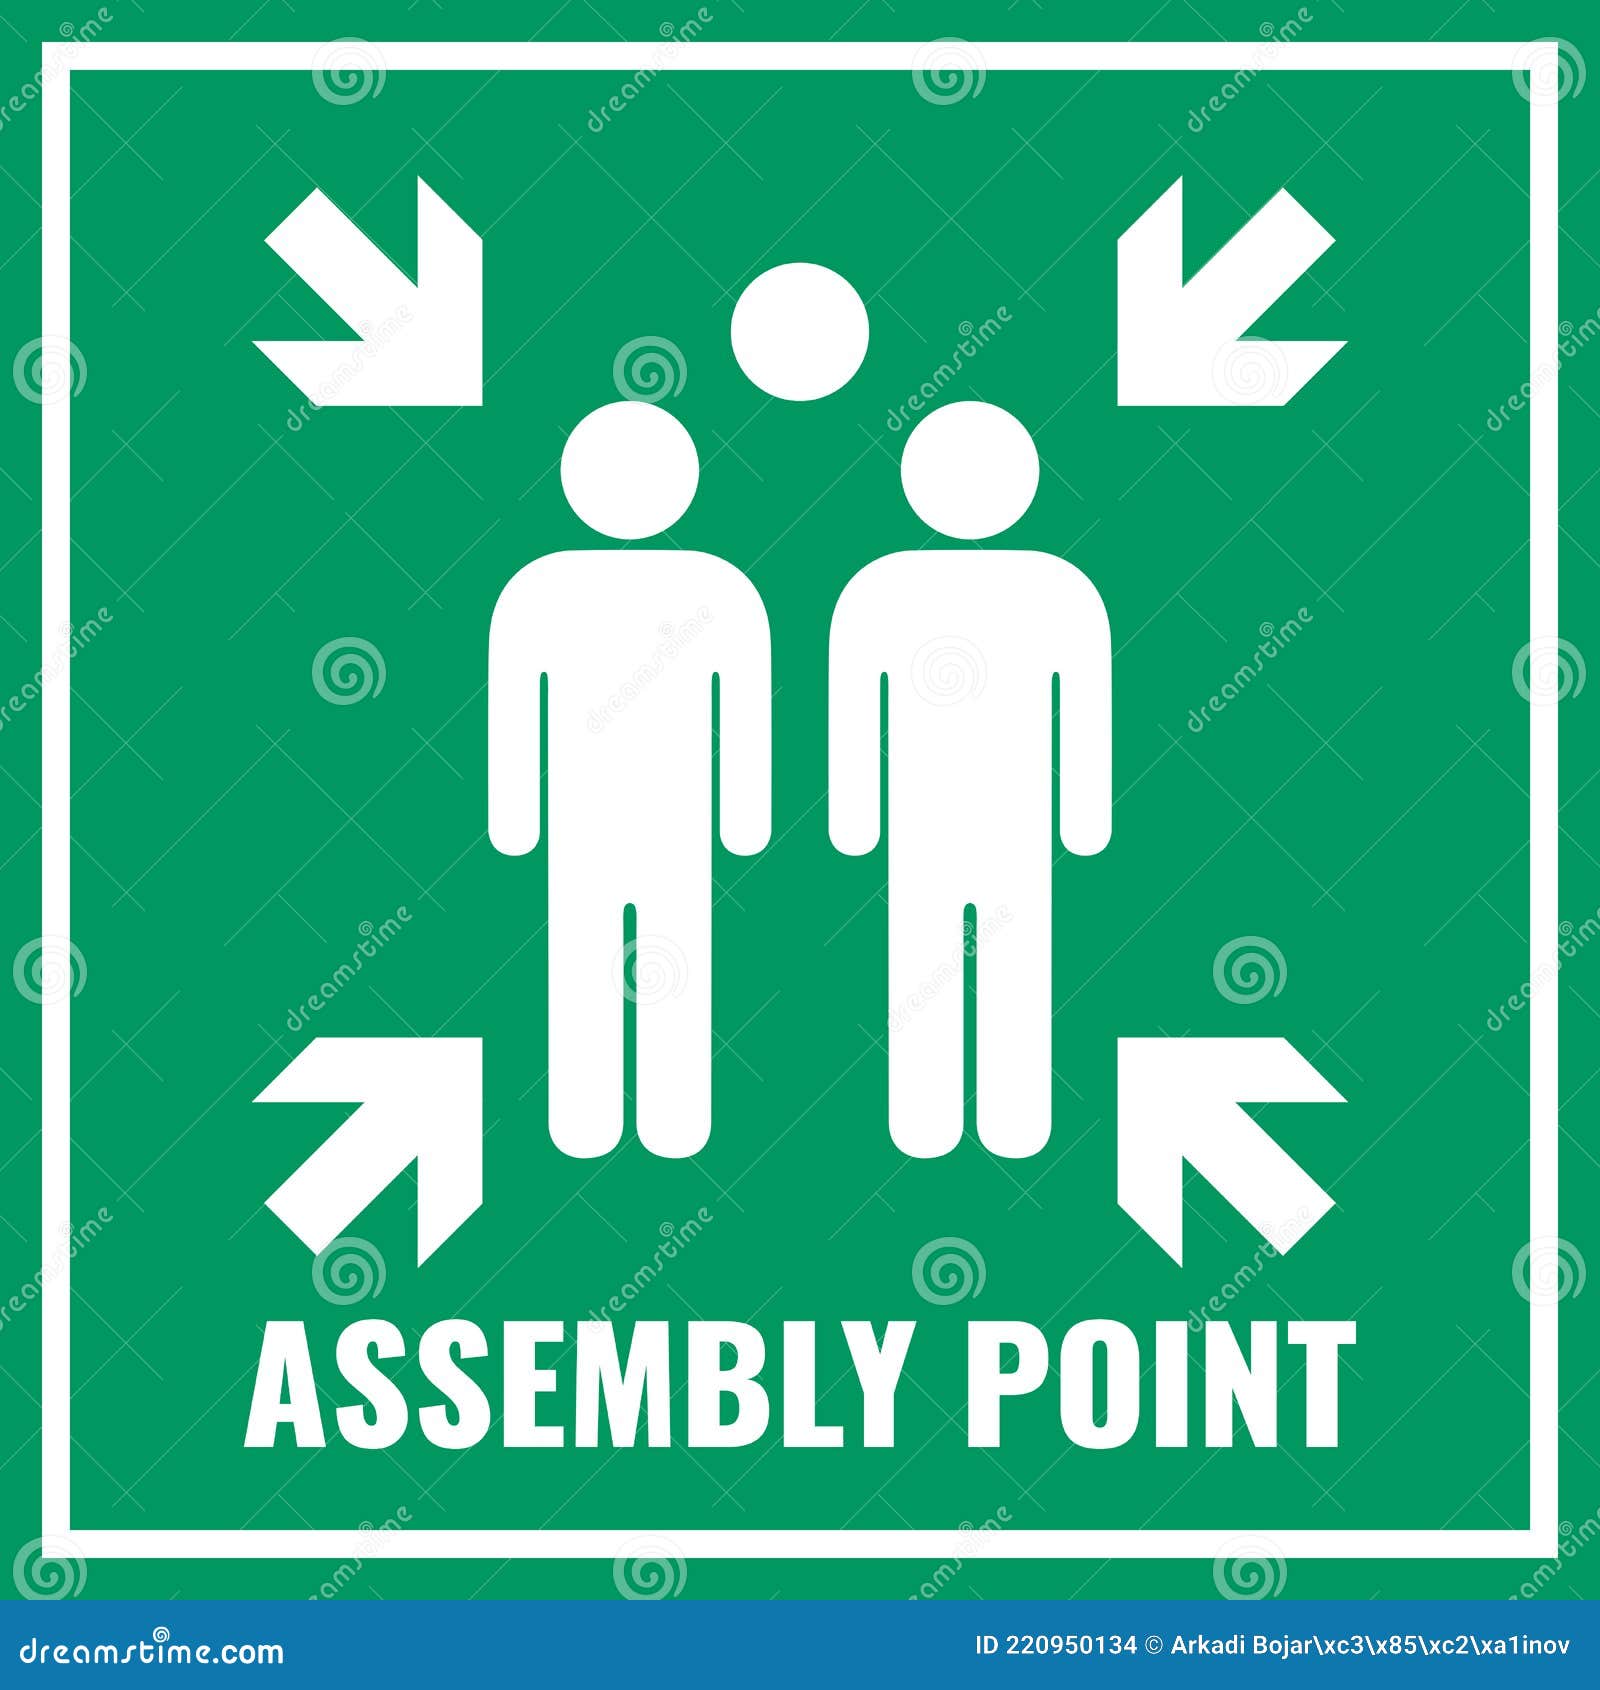 assembly point  sign